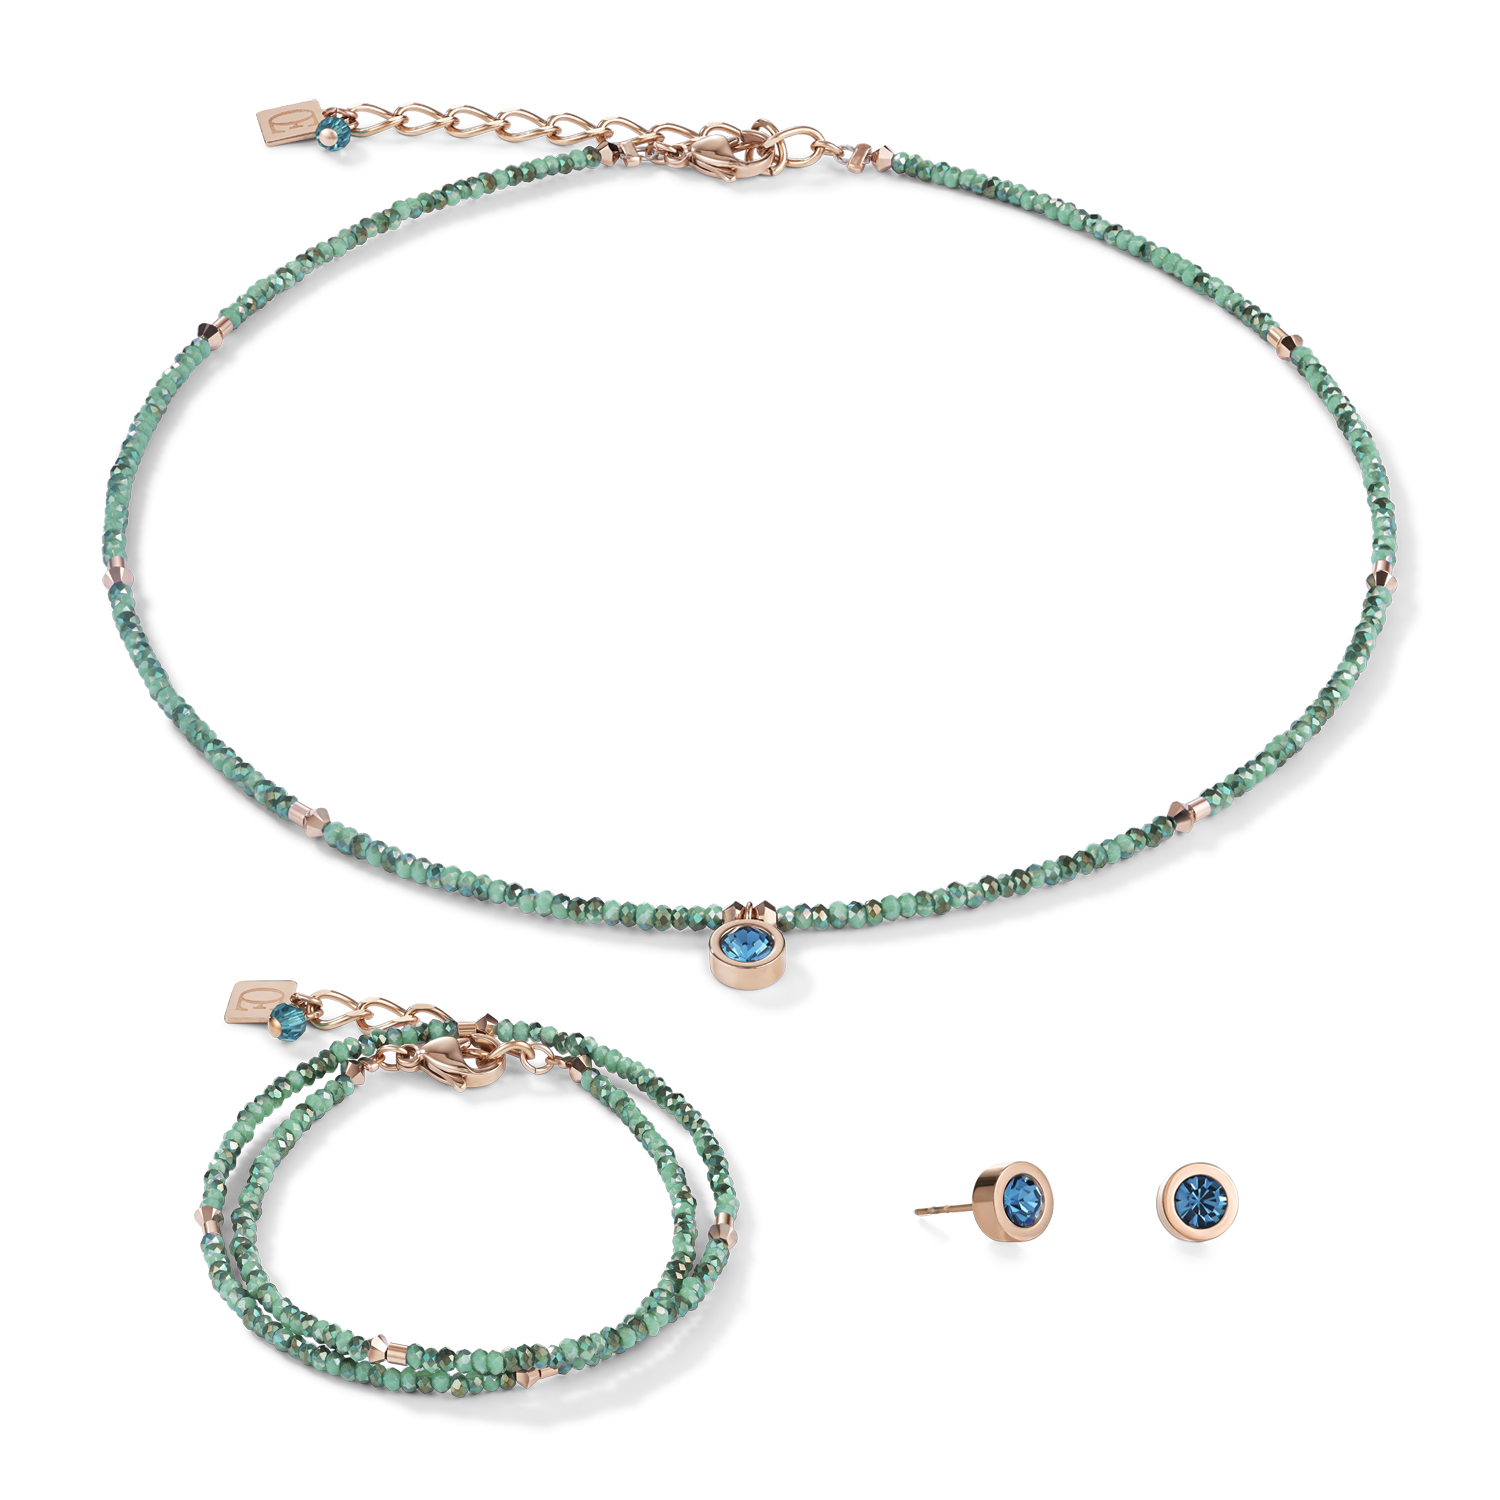 Necklace small crystal rose gold & petrol